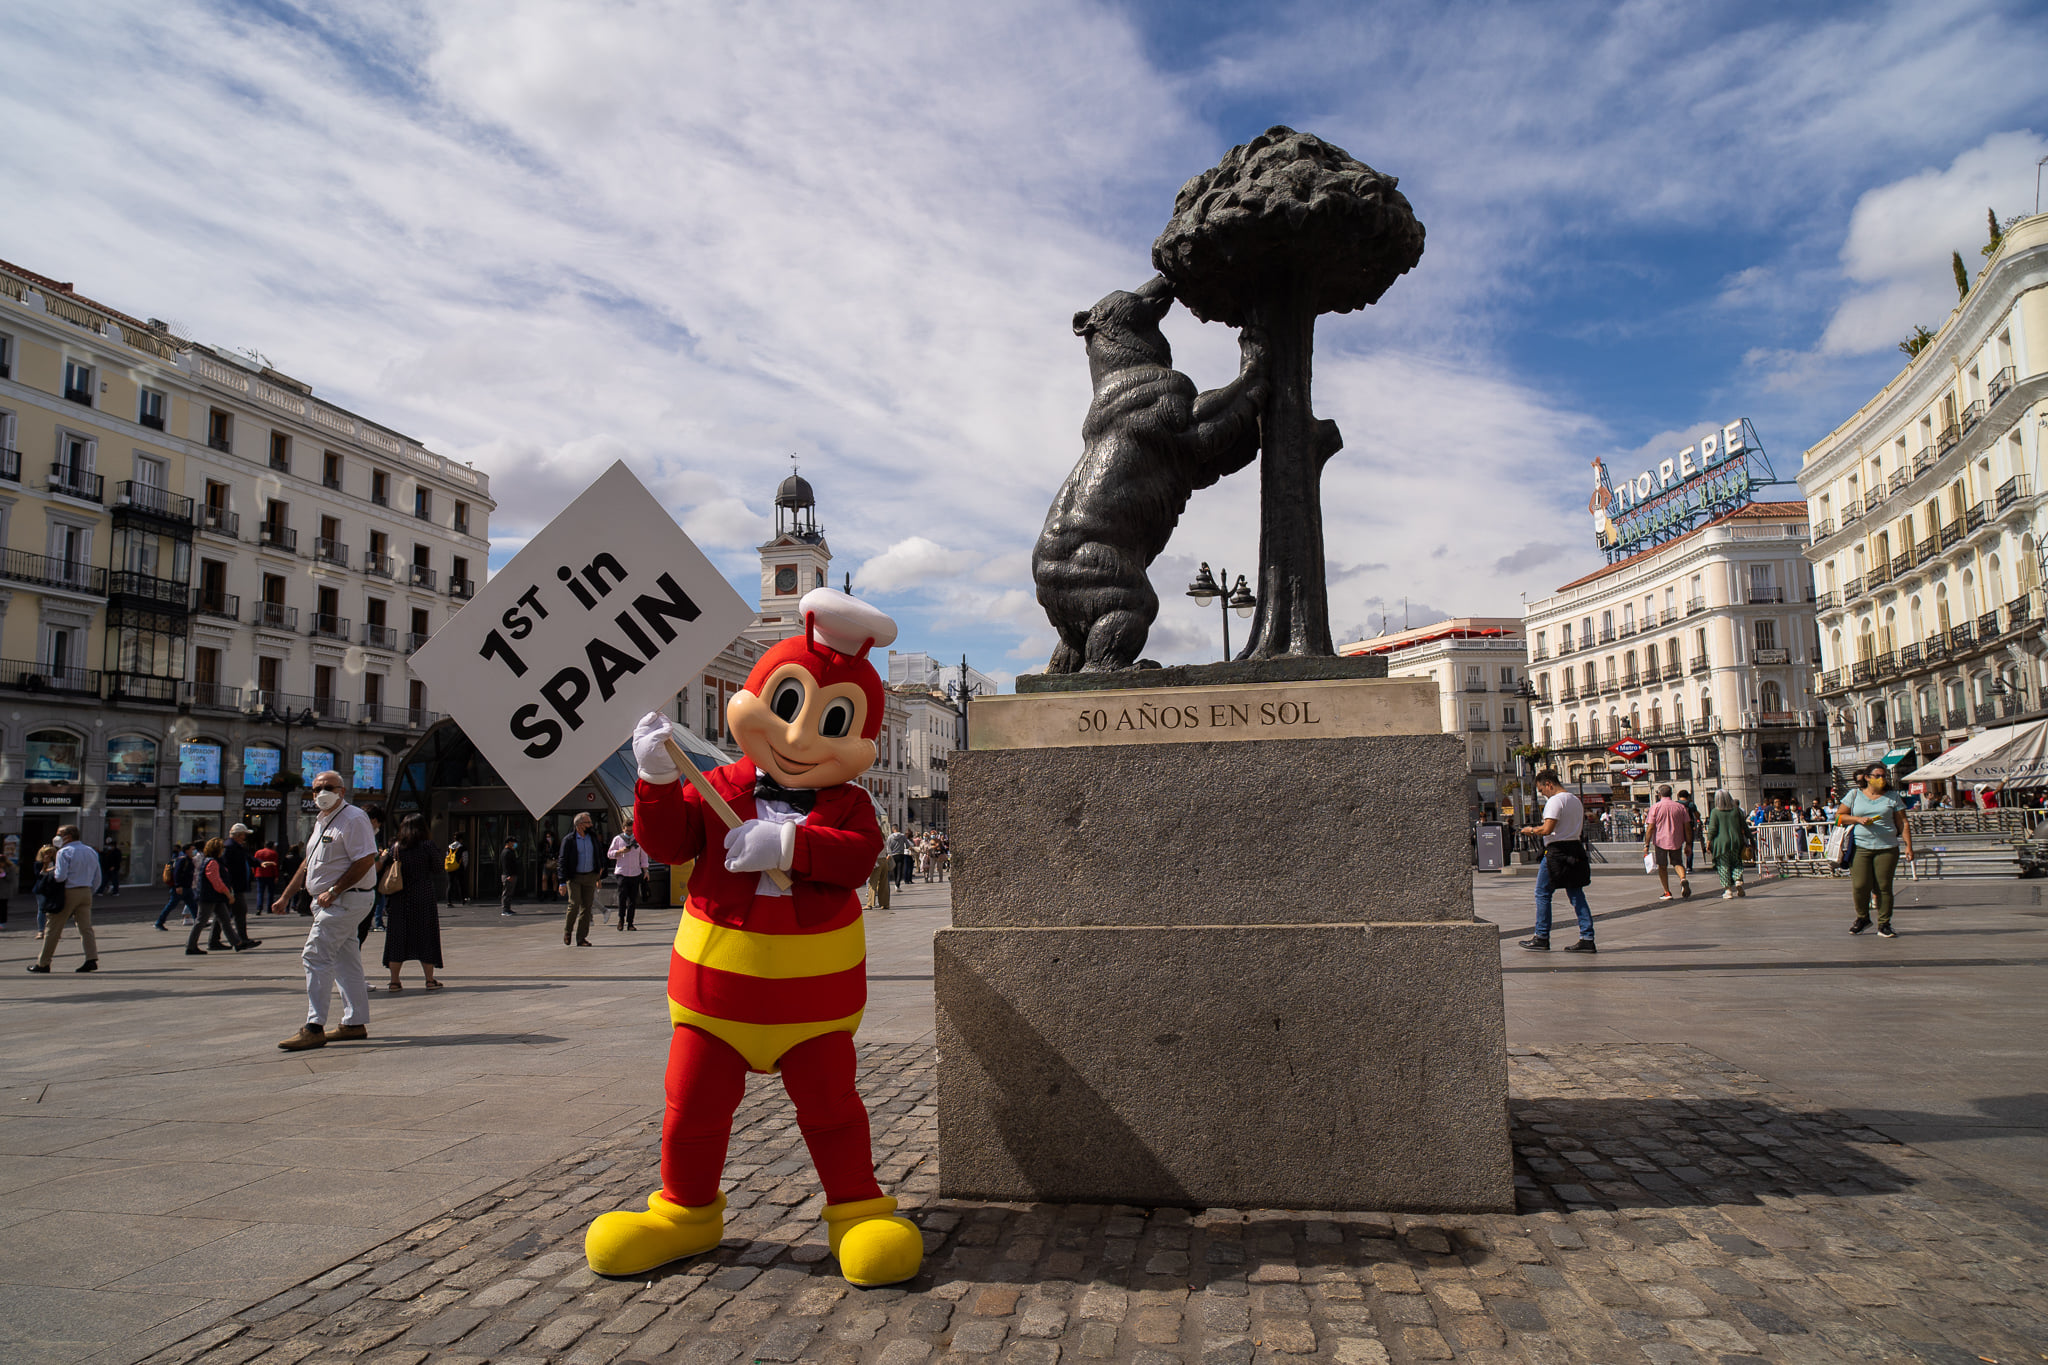 Jollibee’s 1st branch in Spain brings out the best of PH colonization memes